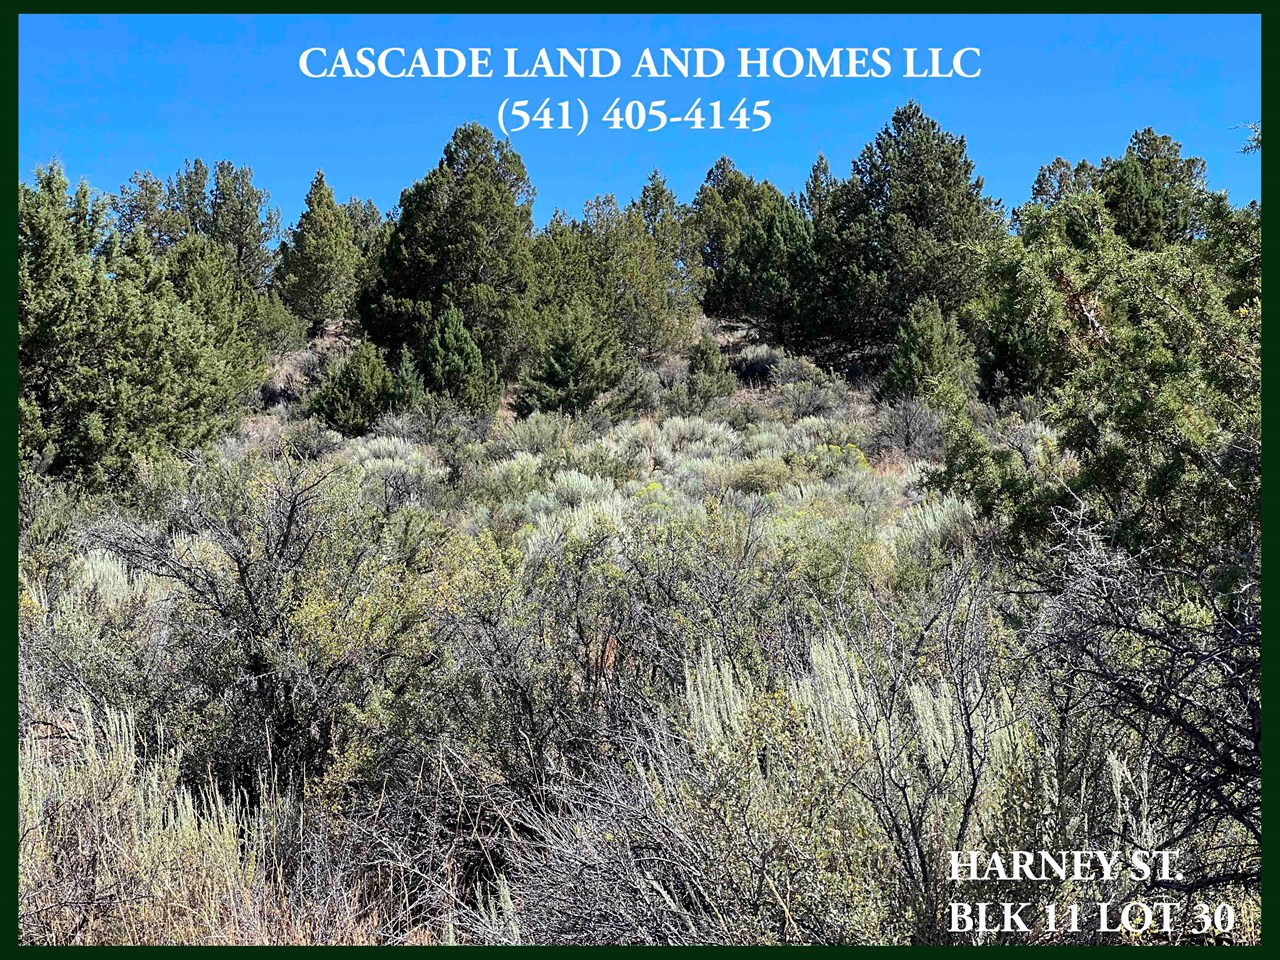 the gentle slope makes a beautiful location for a homesite, the views are spectacular, and you can just imagine sitting on your deck looking up at the stars at night, with almost no light or air pollution!